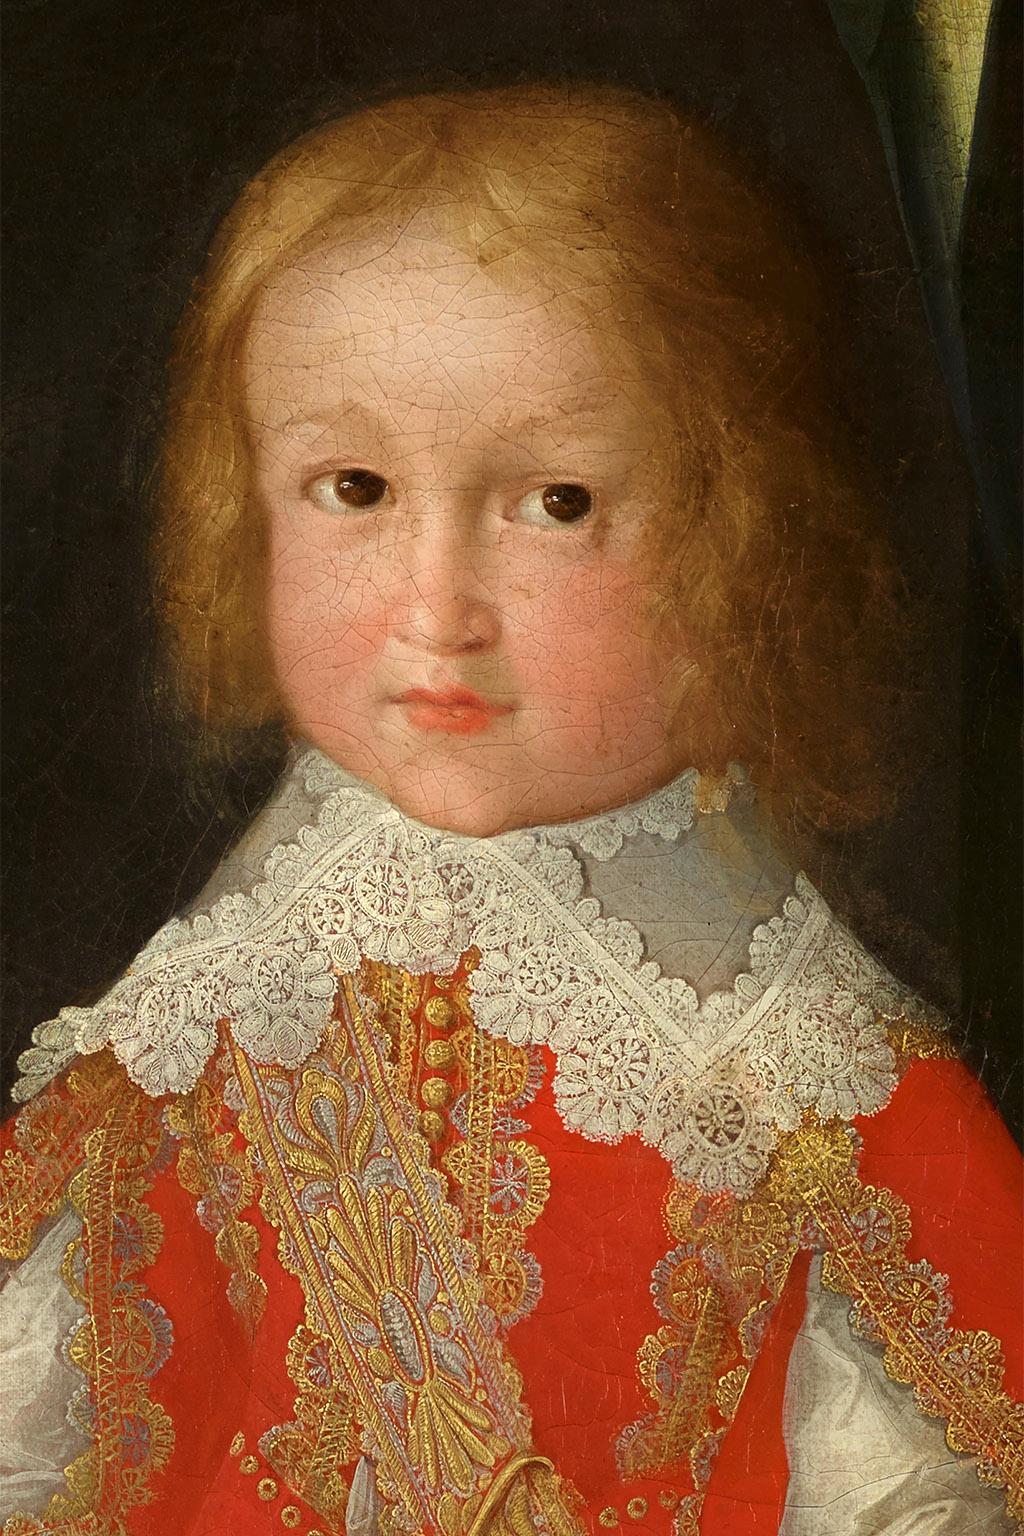 Christian Richter, 1643
This portrait of a child by the hand of the princely Saxon court painter Richter (Altenburg c. 1612-1667 Weimar) shows the first Duke of Saxe-Jena as a boy of five years of age in a splendid red suit with gold borders and